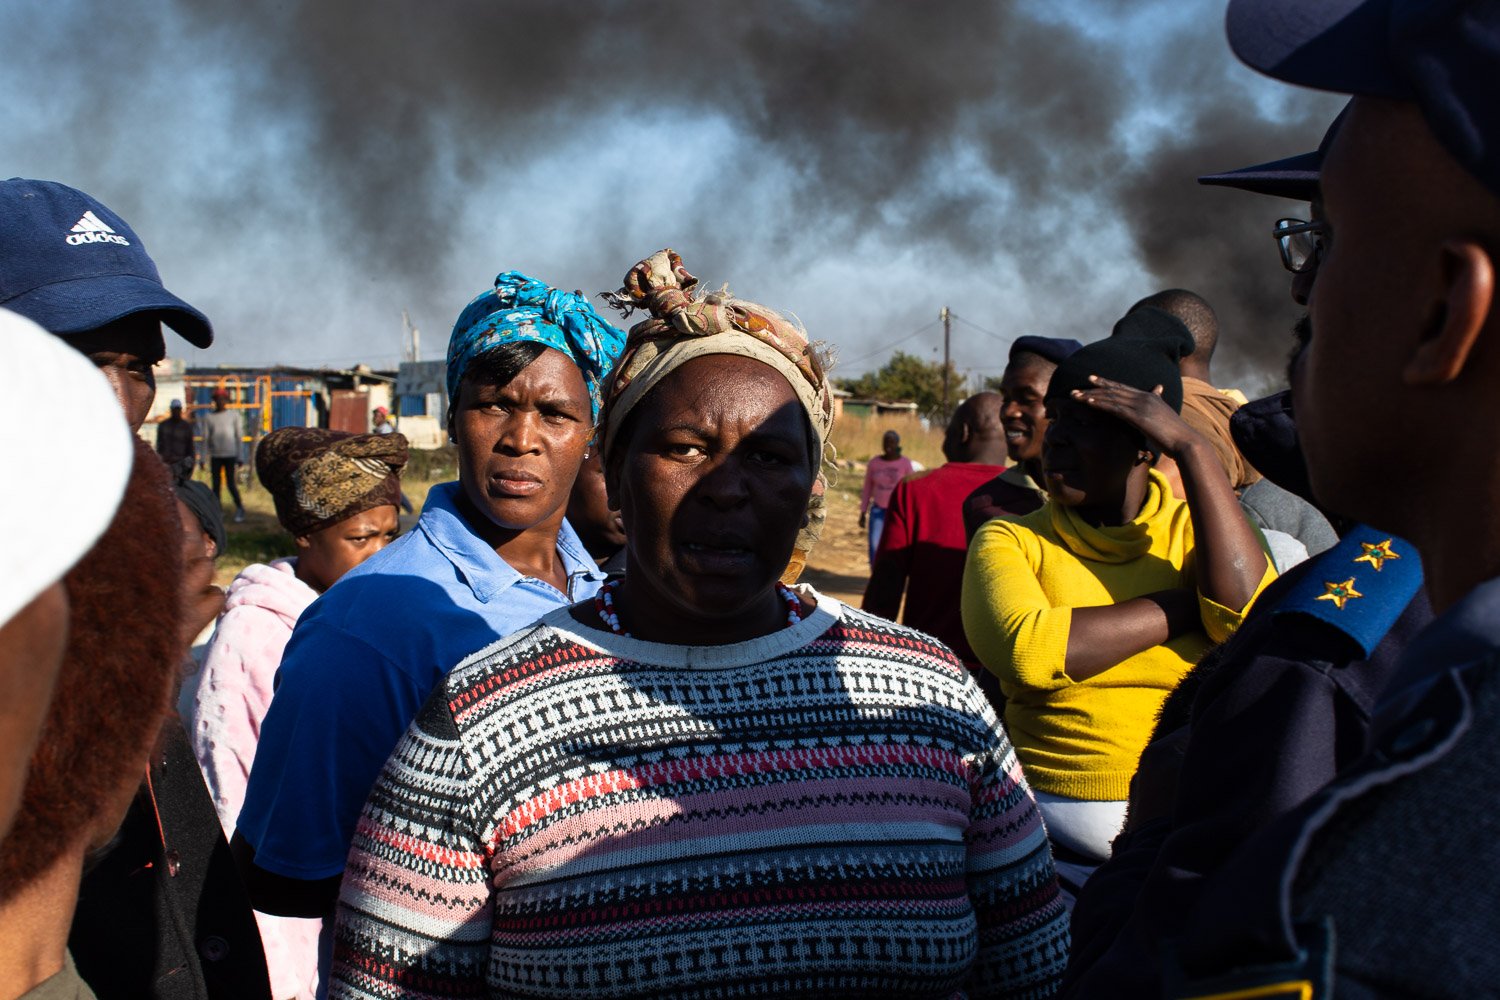 Coal and corruption in South Africa